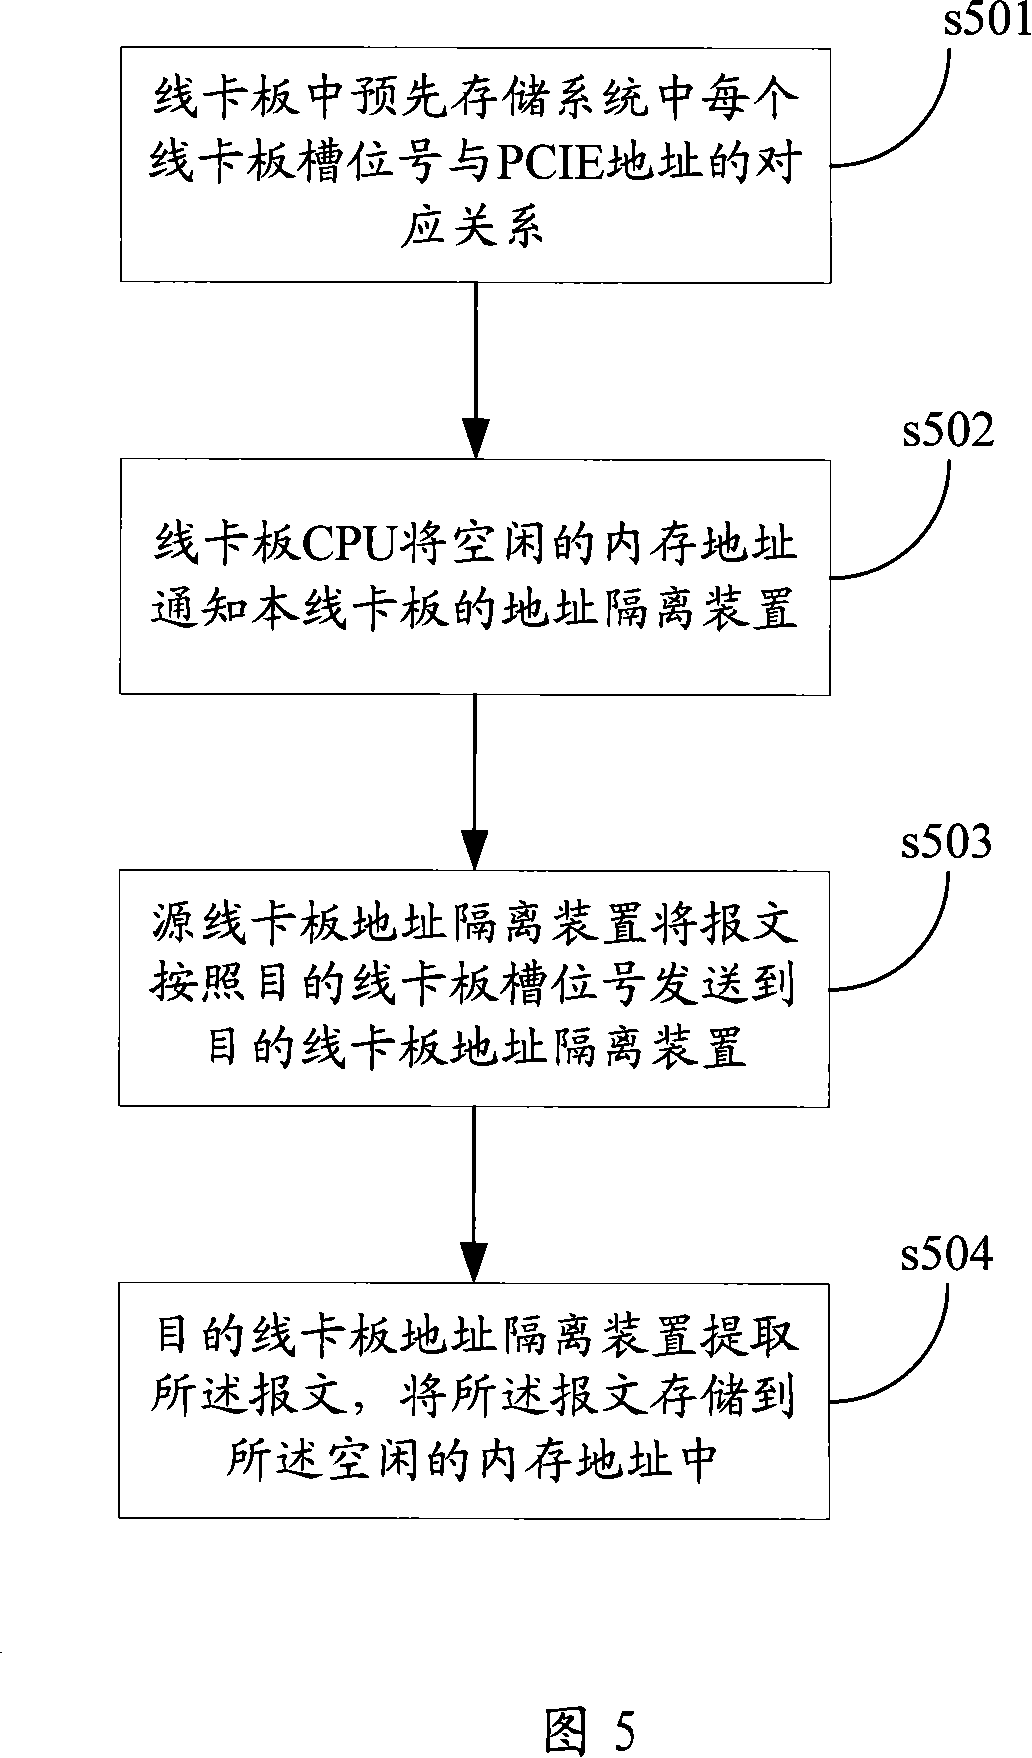 A PCIE data transmission method, system and device